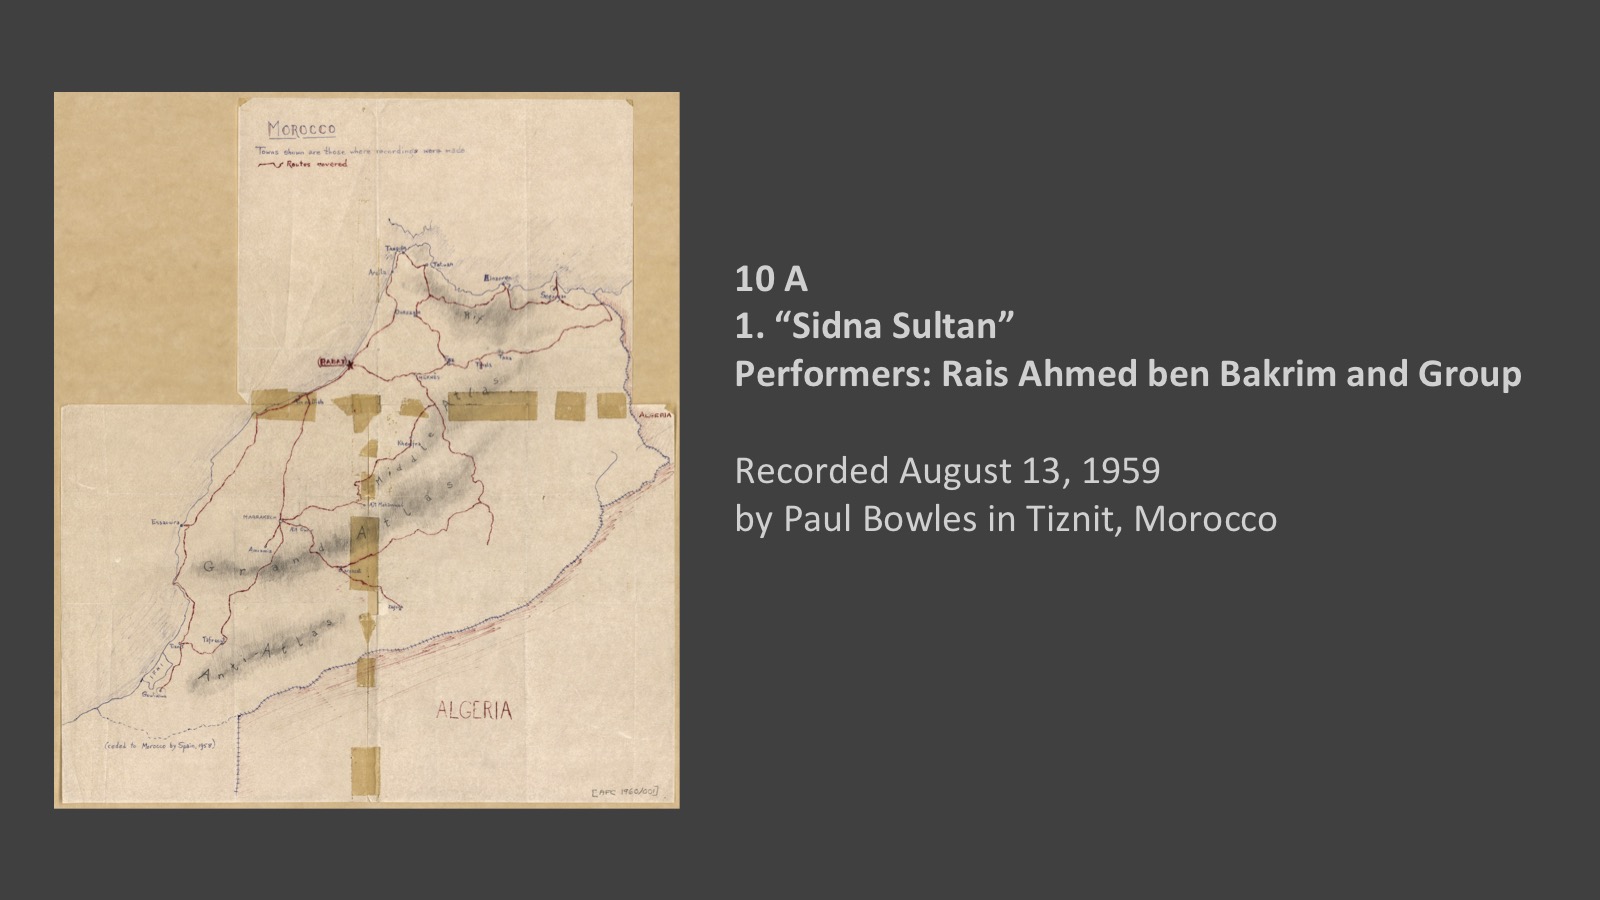 10 A
1. “Sidna Sultan”
Performers: Rais Ahmed ben Bakrim and Group

Recorded August 13, 1959
by Paul Bowles in Tiznit, Morocco